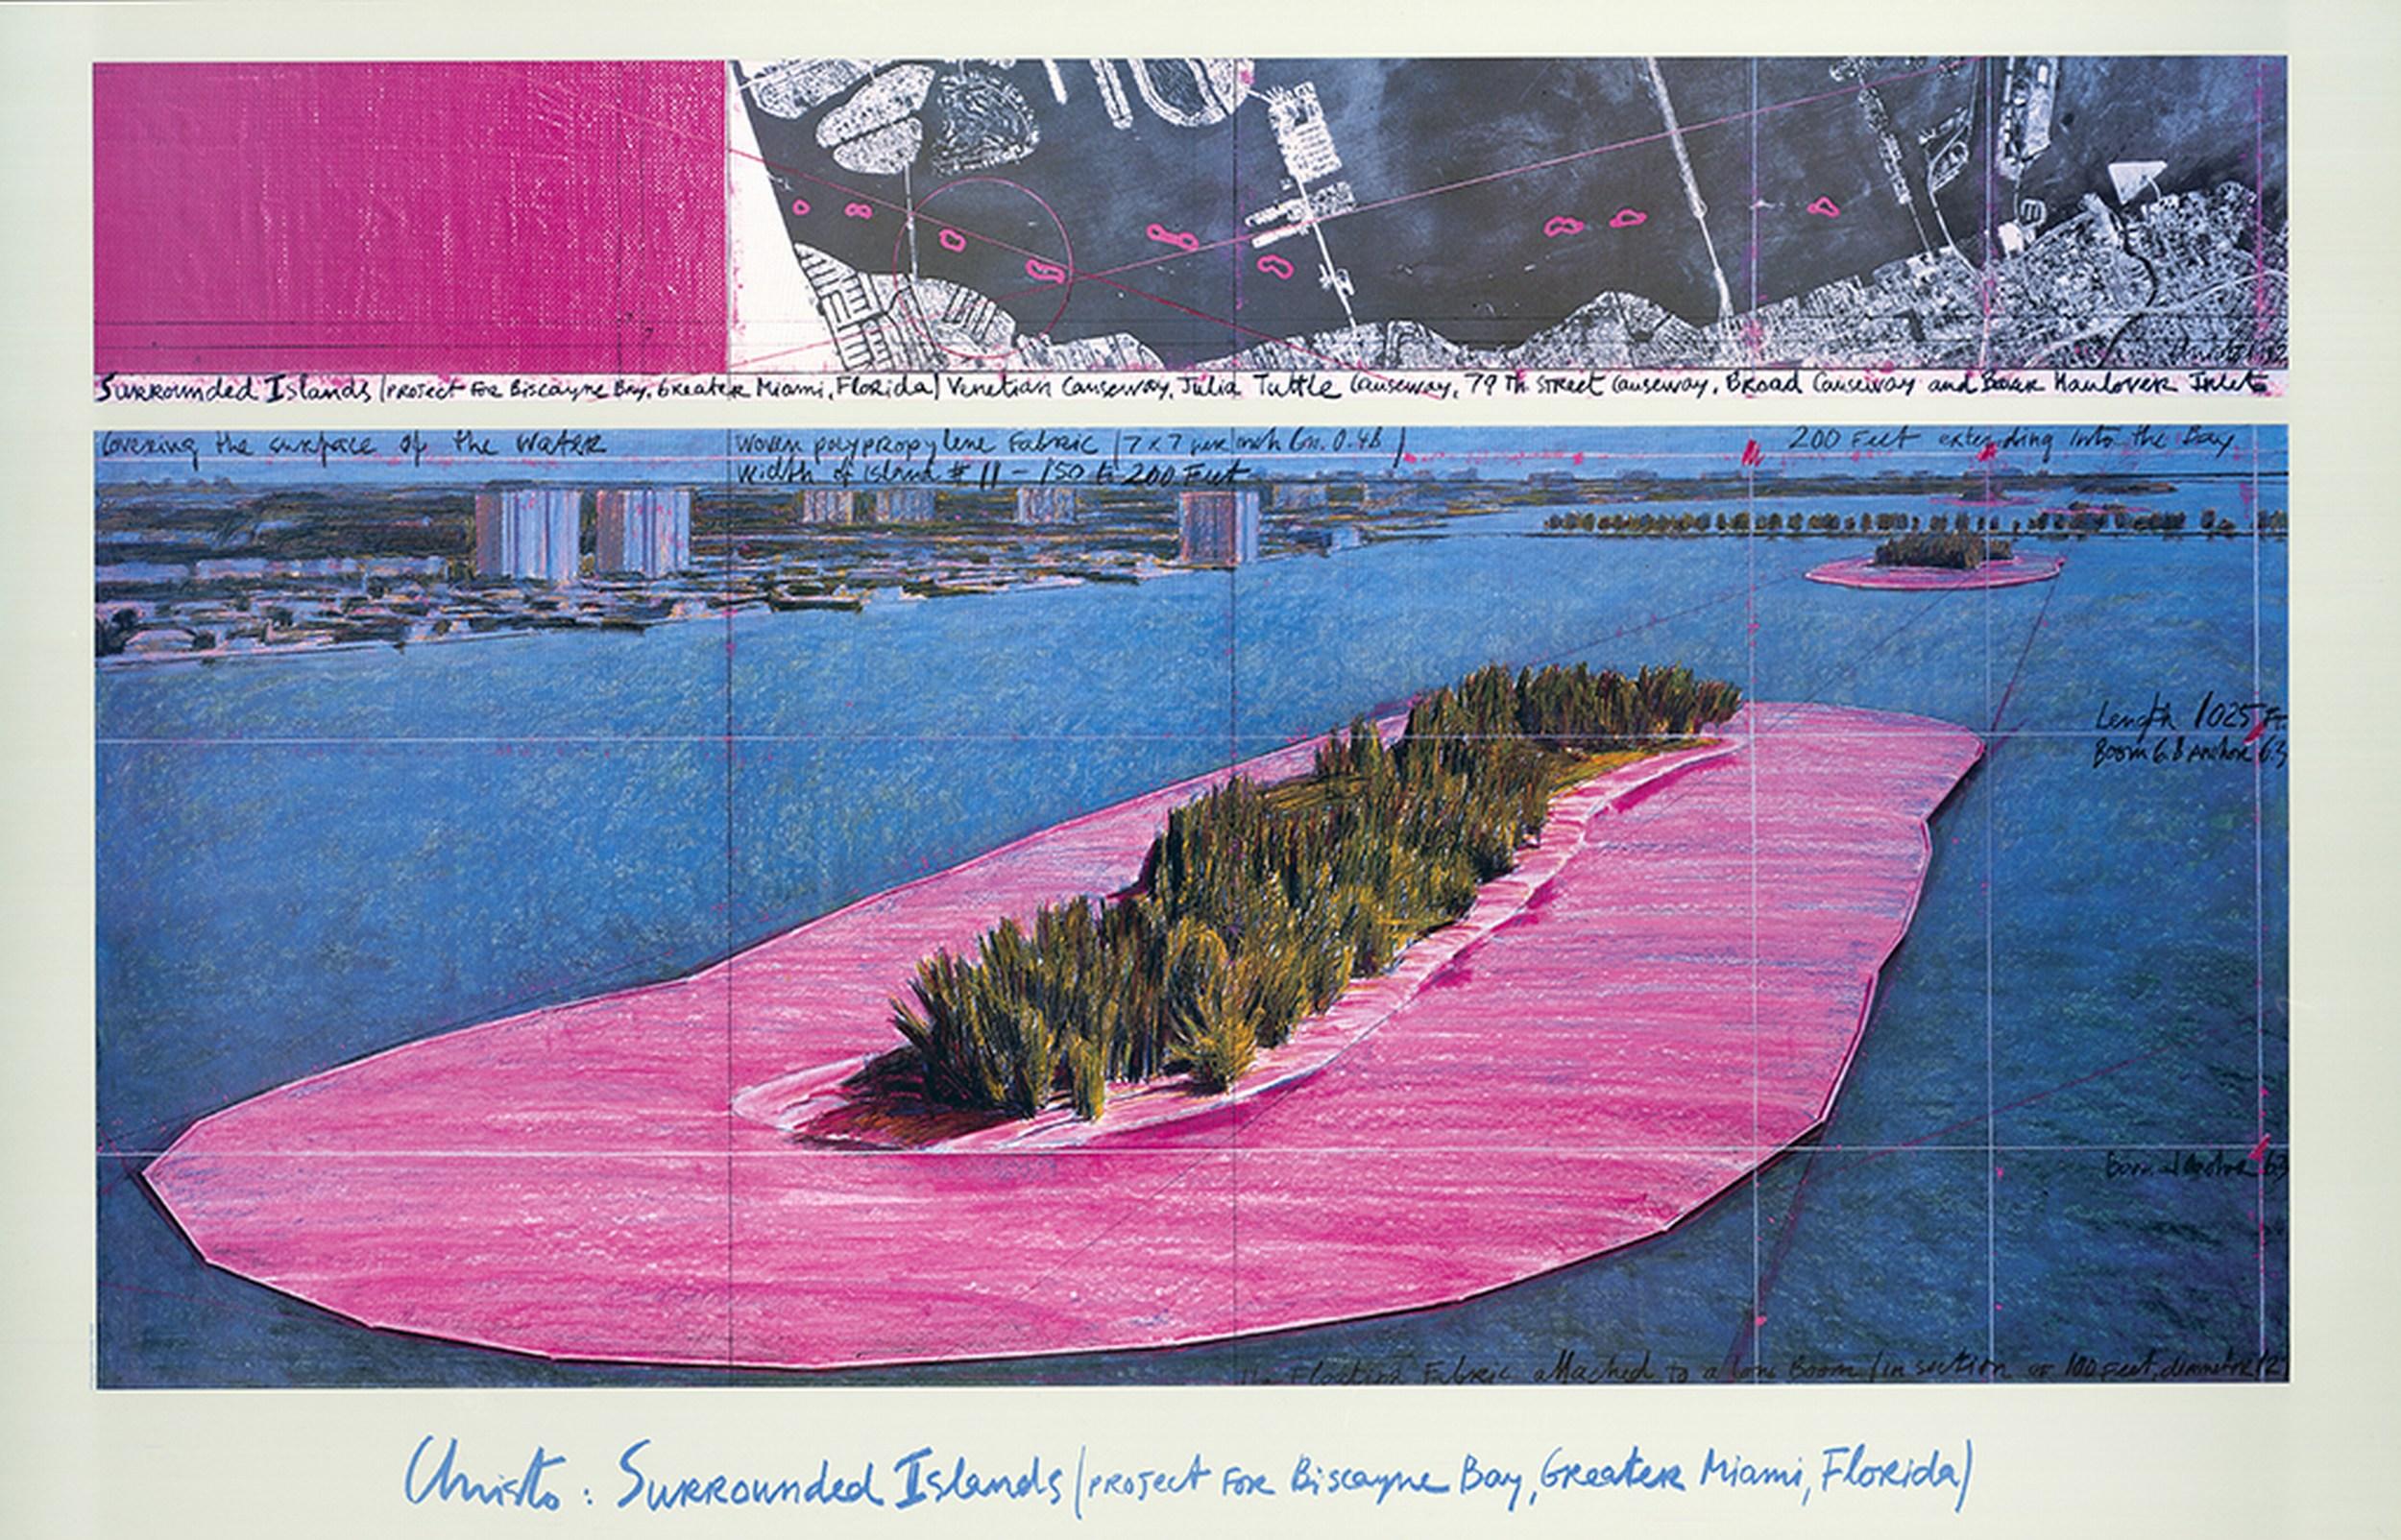 Surrounded Islands, Biscayne Bay, Greater Miami, Florida - Print by Christo and Jeanne-Claude